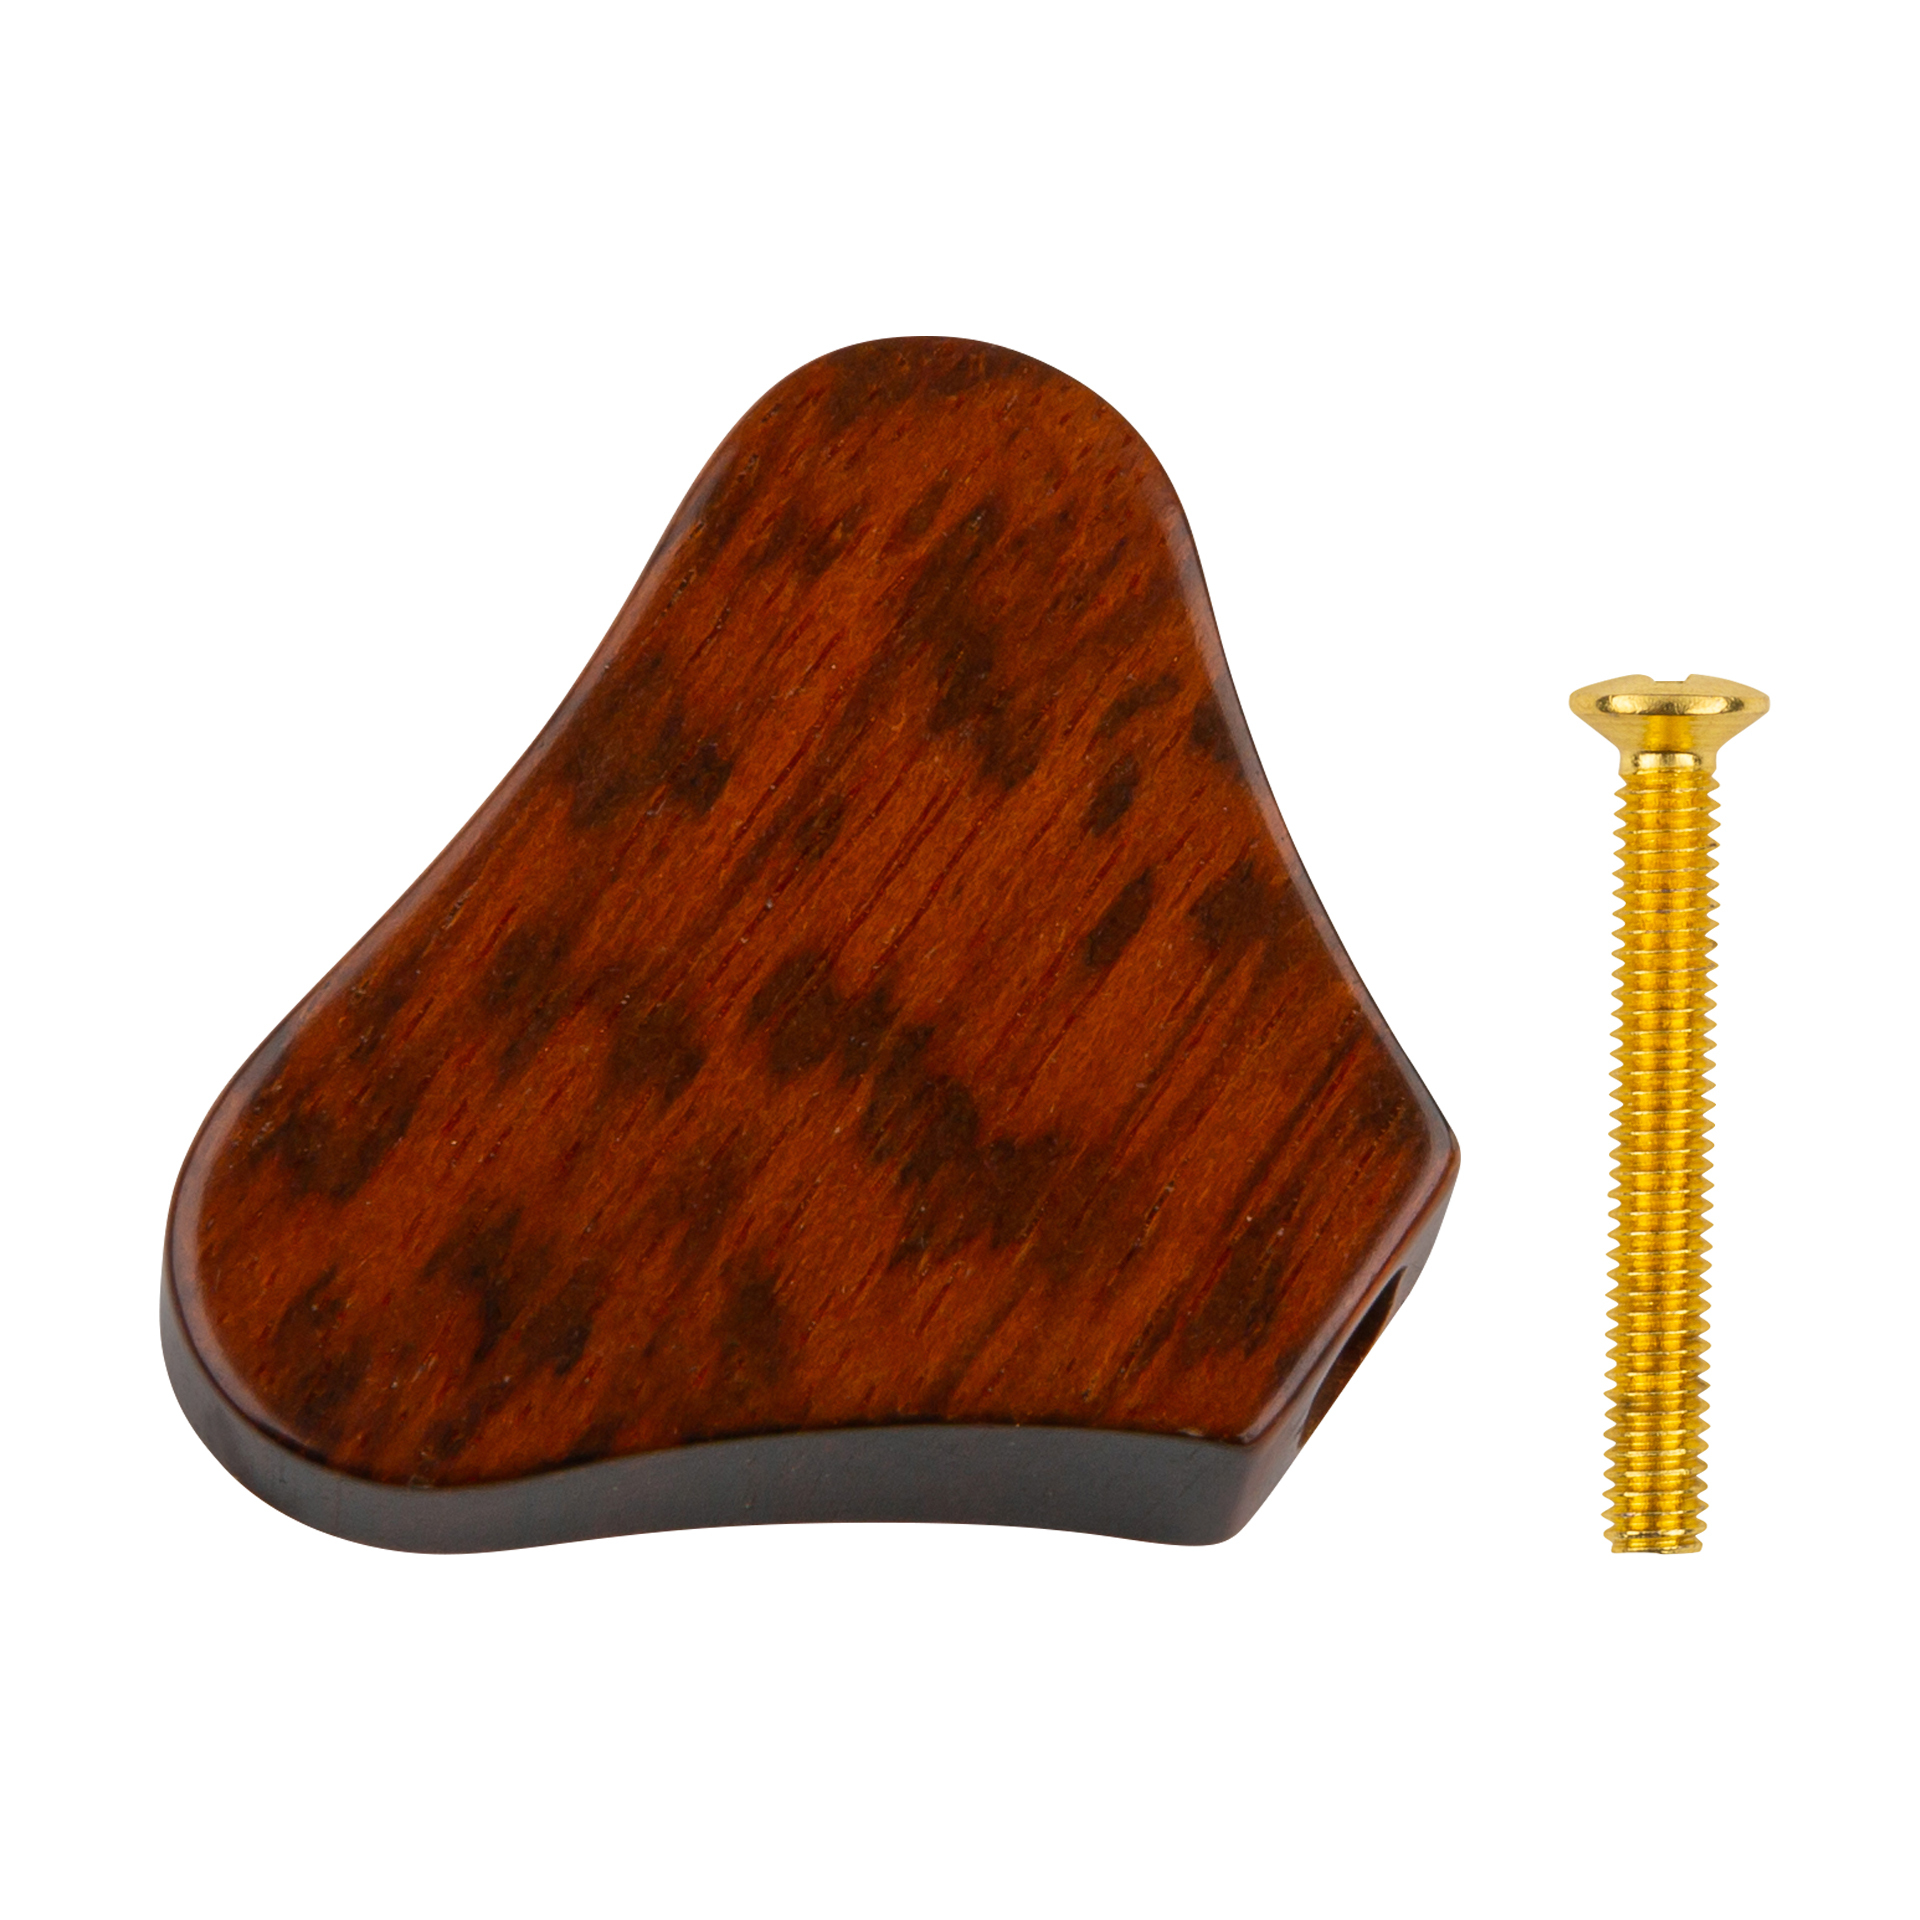 Warwick Parts - Wooden Peg for Warwick Machine Heads - Snakewood (with Gold Screw)